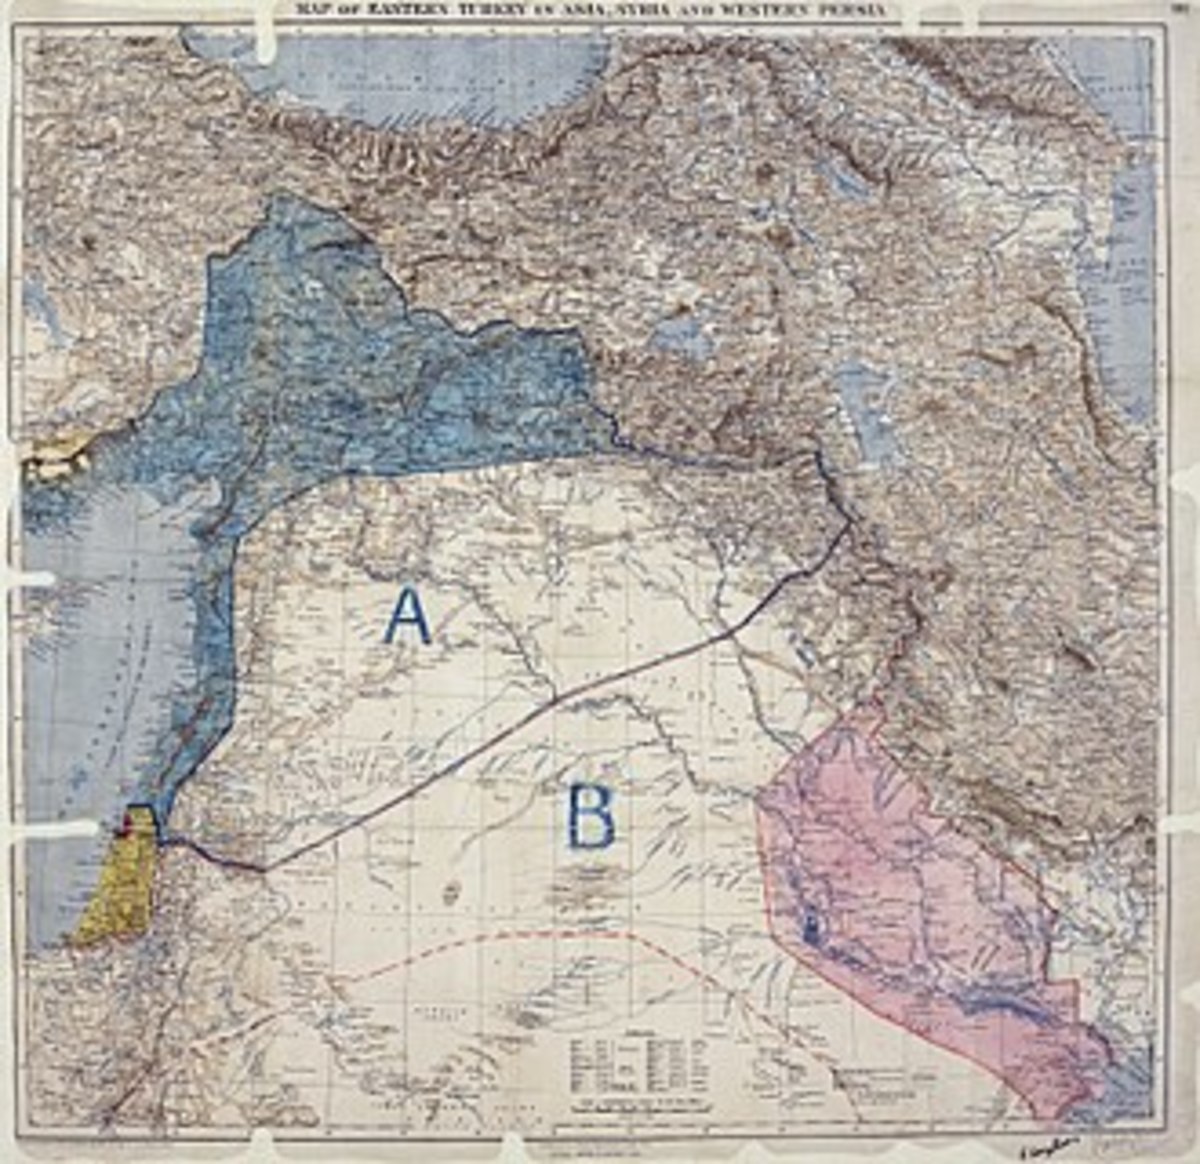 Sykes-Picot, the Agreement That Haunts the Modern Middle East